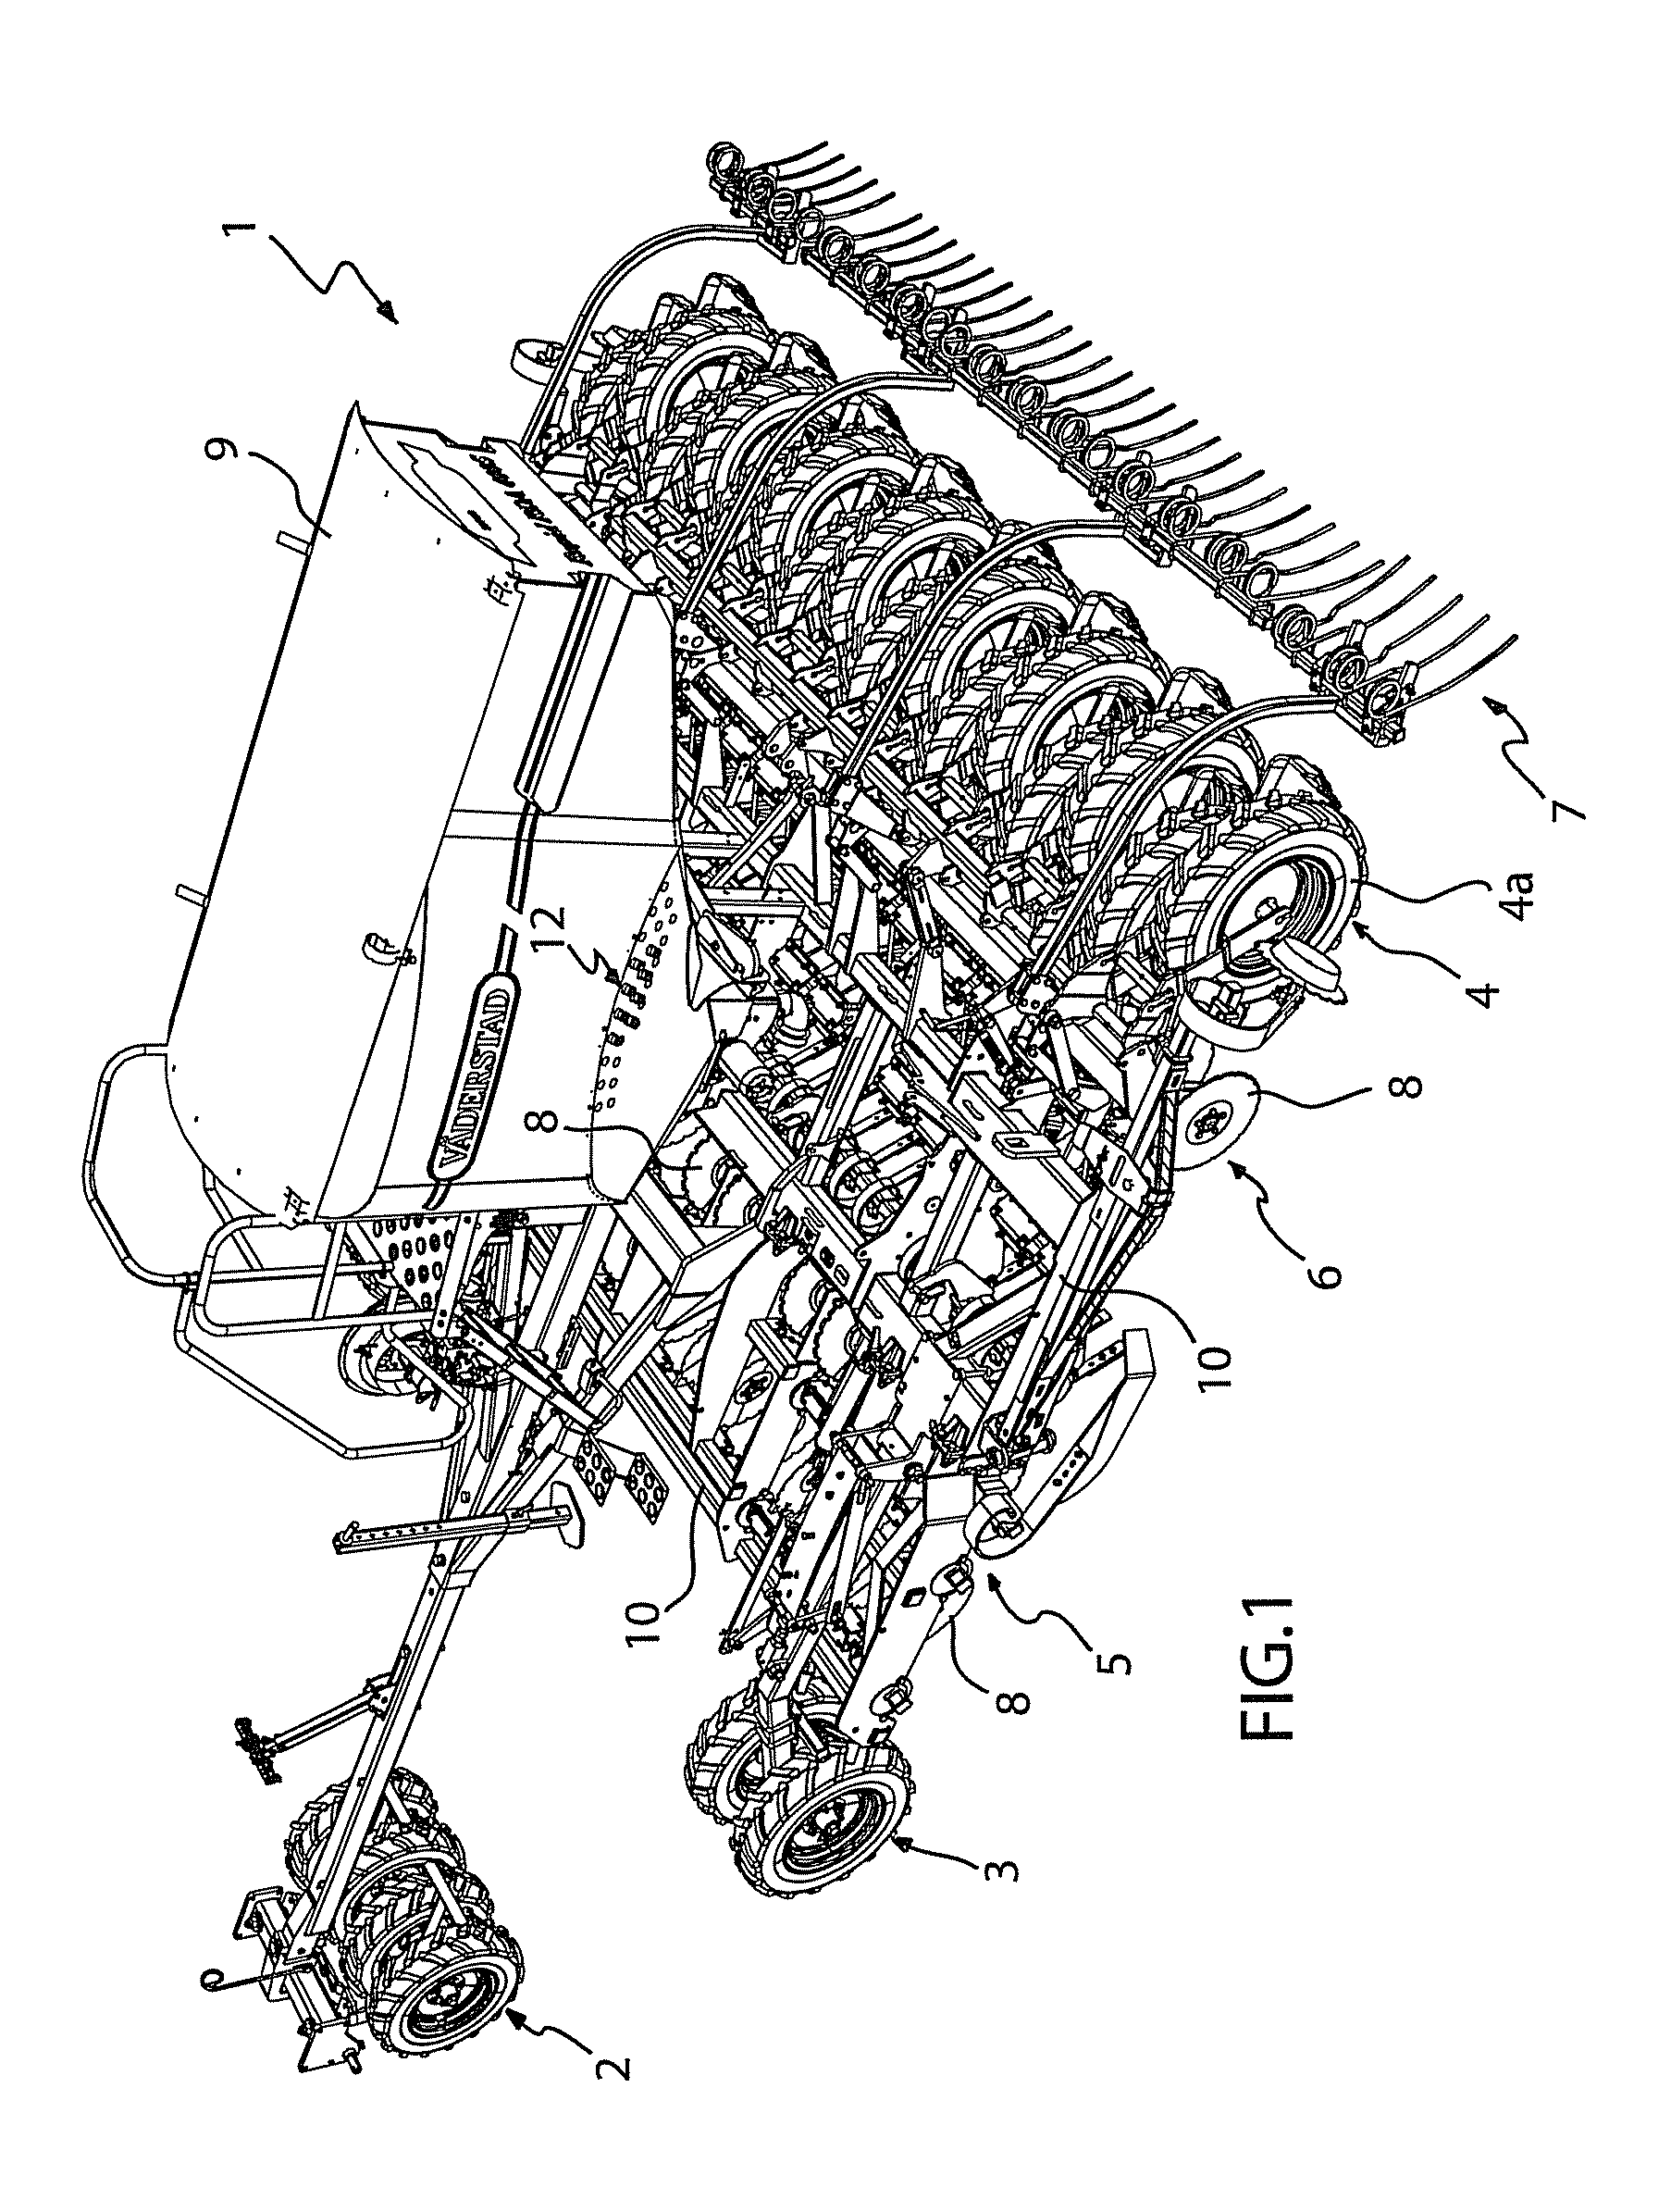 Disc for an agricultural implement